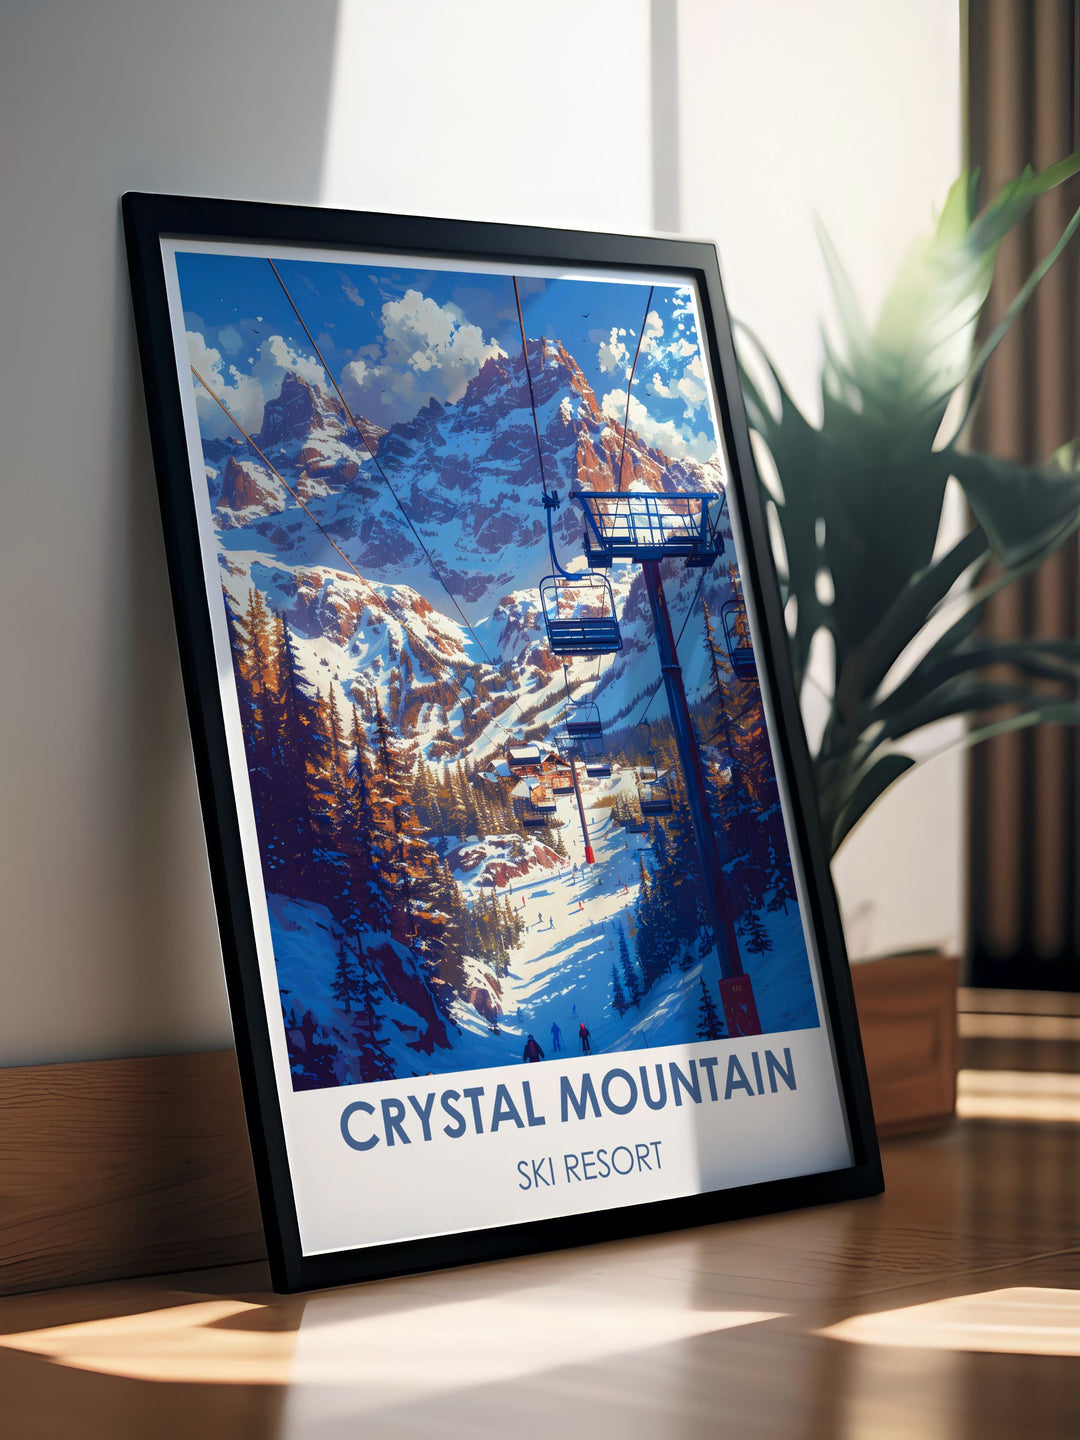 Gallery wall art featuring the majestic vistas from Mount Rainier as seen from Crystal Mountain, perfect for those who appreciate natural beauty and alpine views.